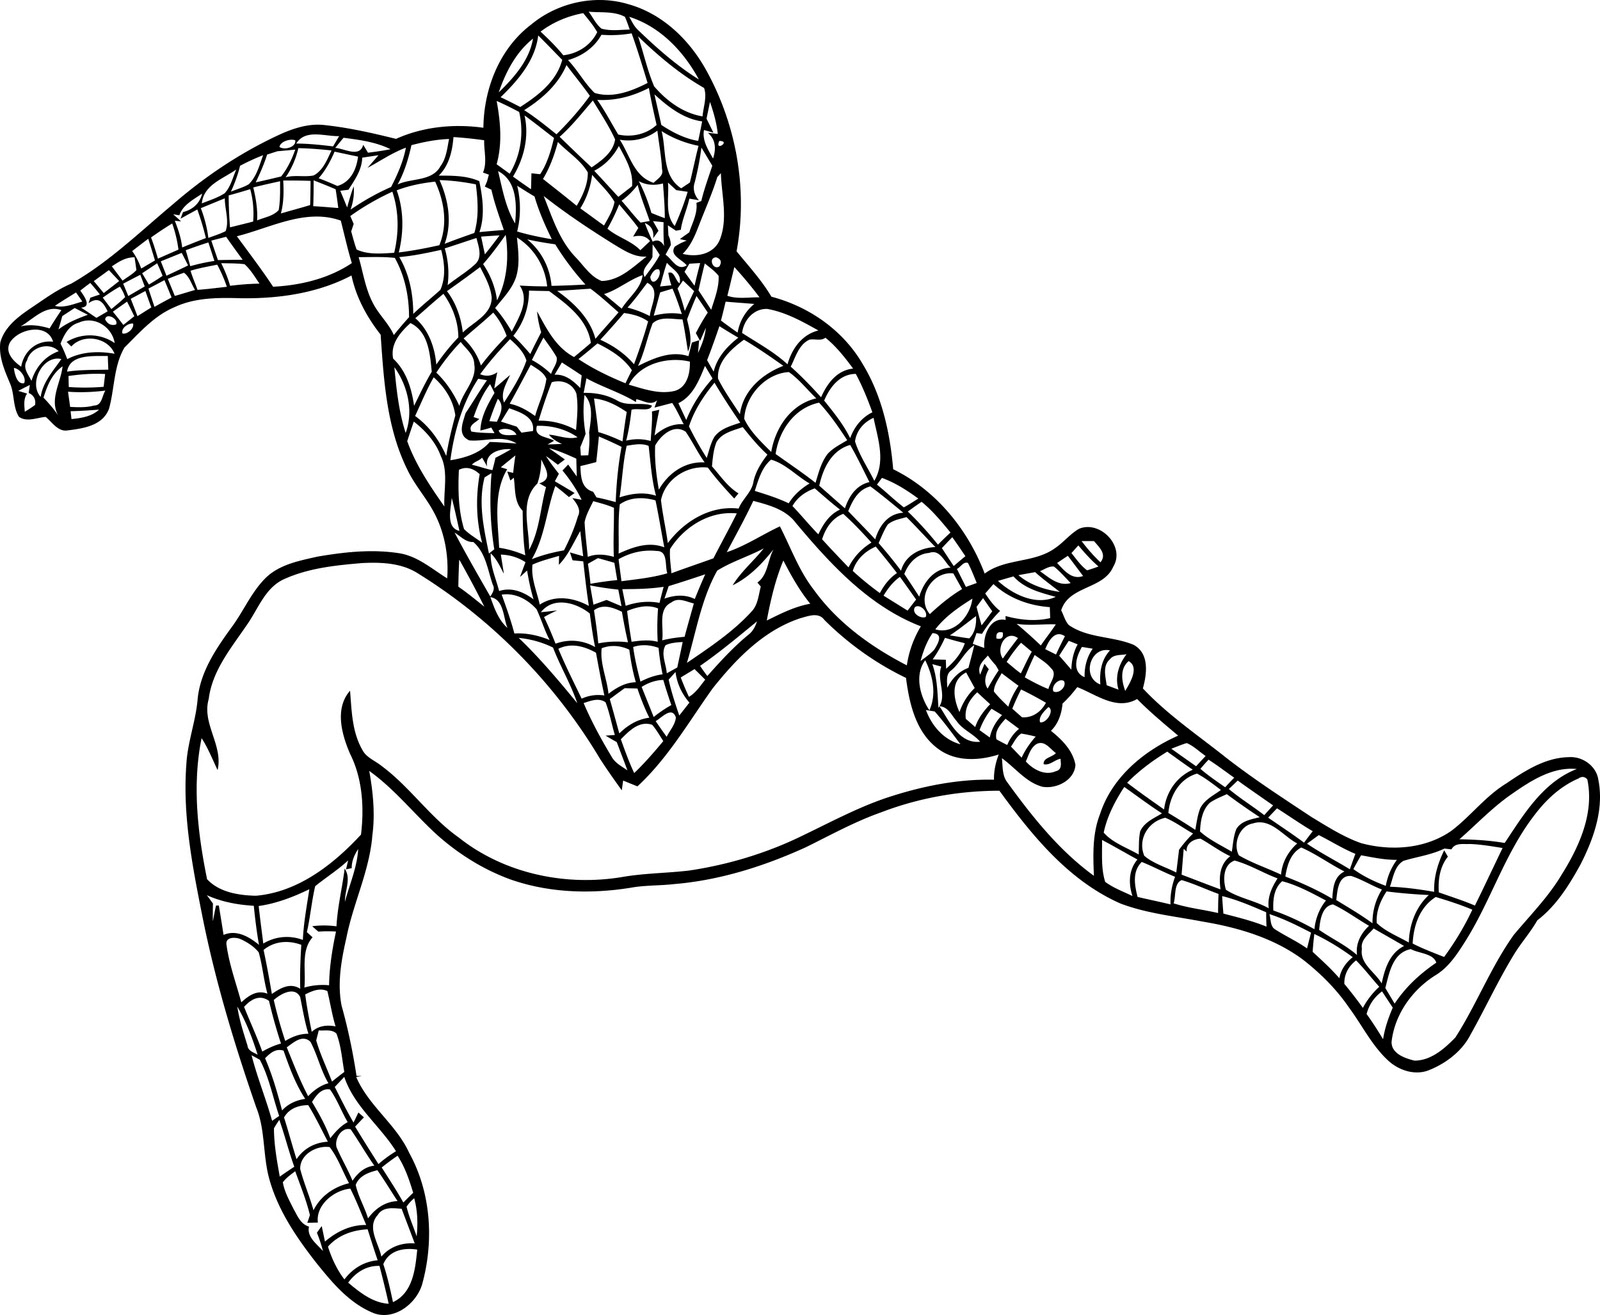 Spiderman Coloring Pages To Print   Hello Coloring